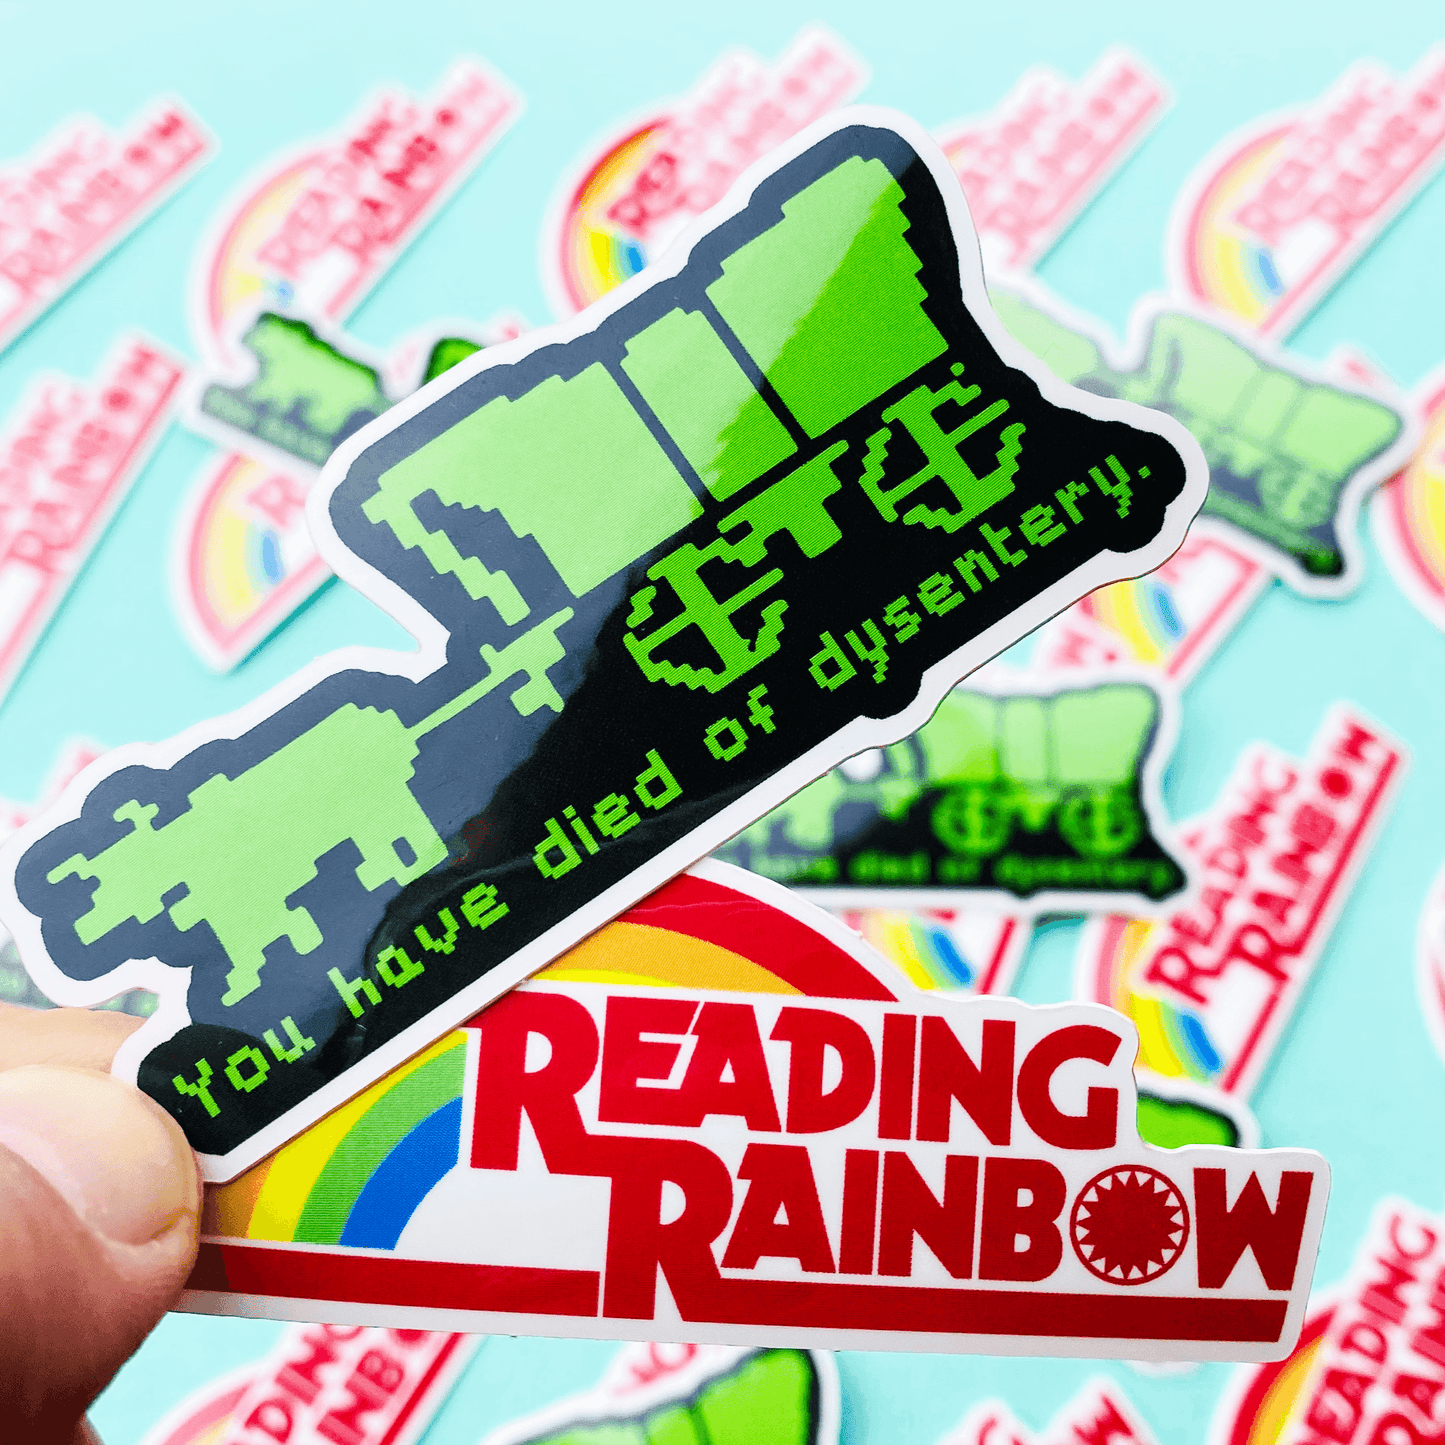 Eighties Kids Sticker Pack Reading Rainbow Sticker Oregon Trail Sticker Combo Pack of designs from the 1980s - Ottos Grotto :: Stickers For Your Stuff